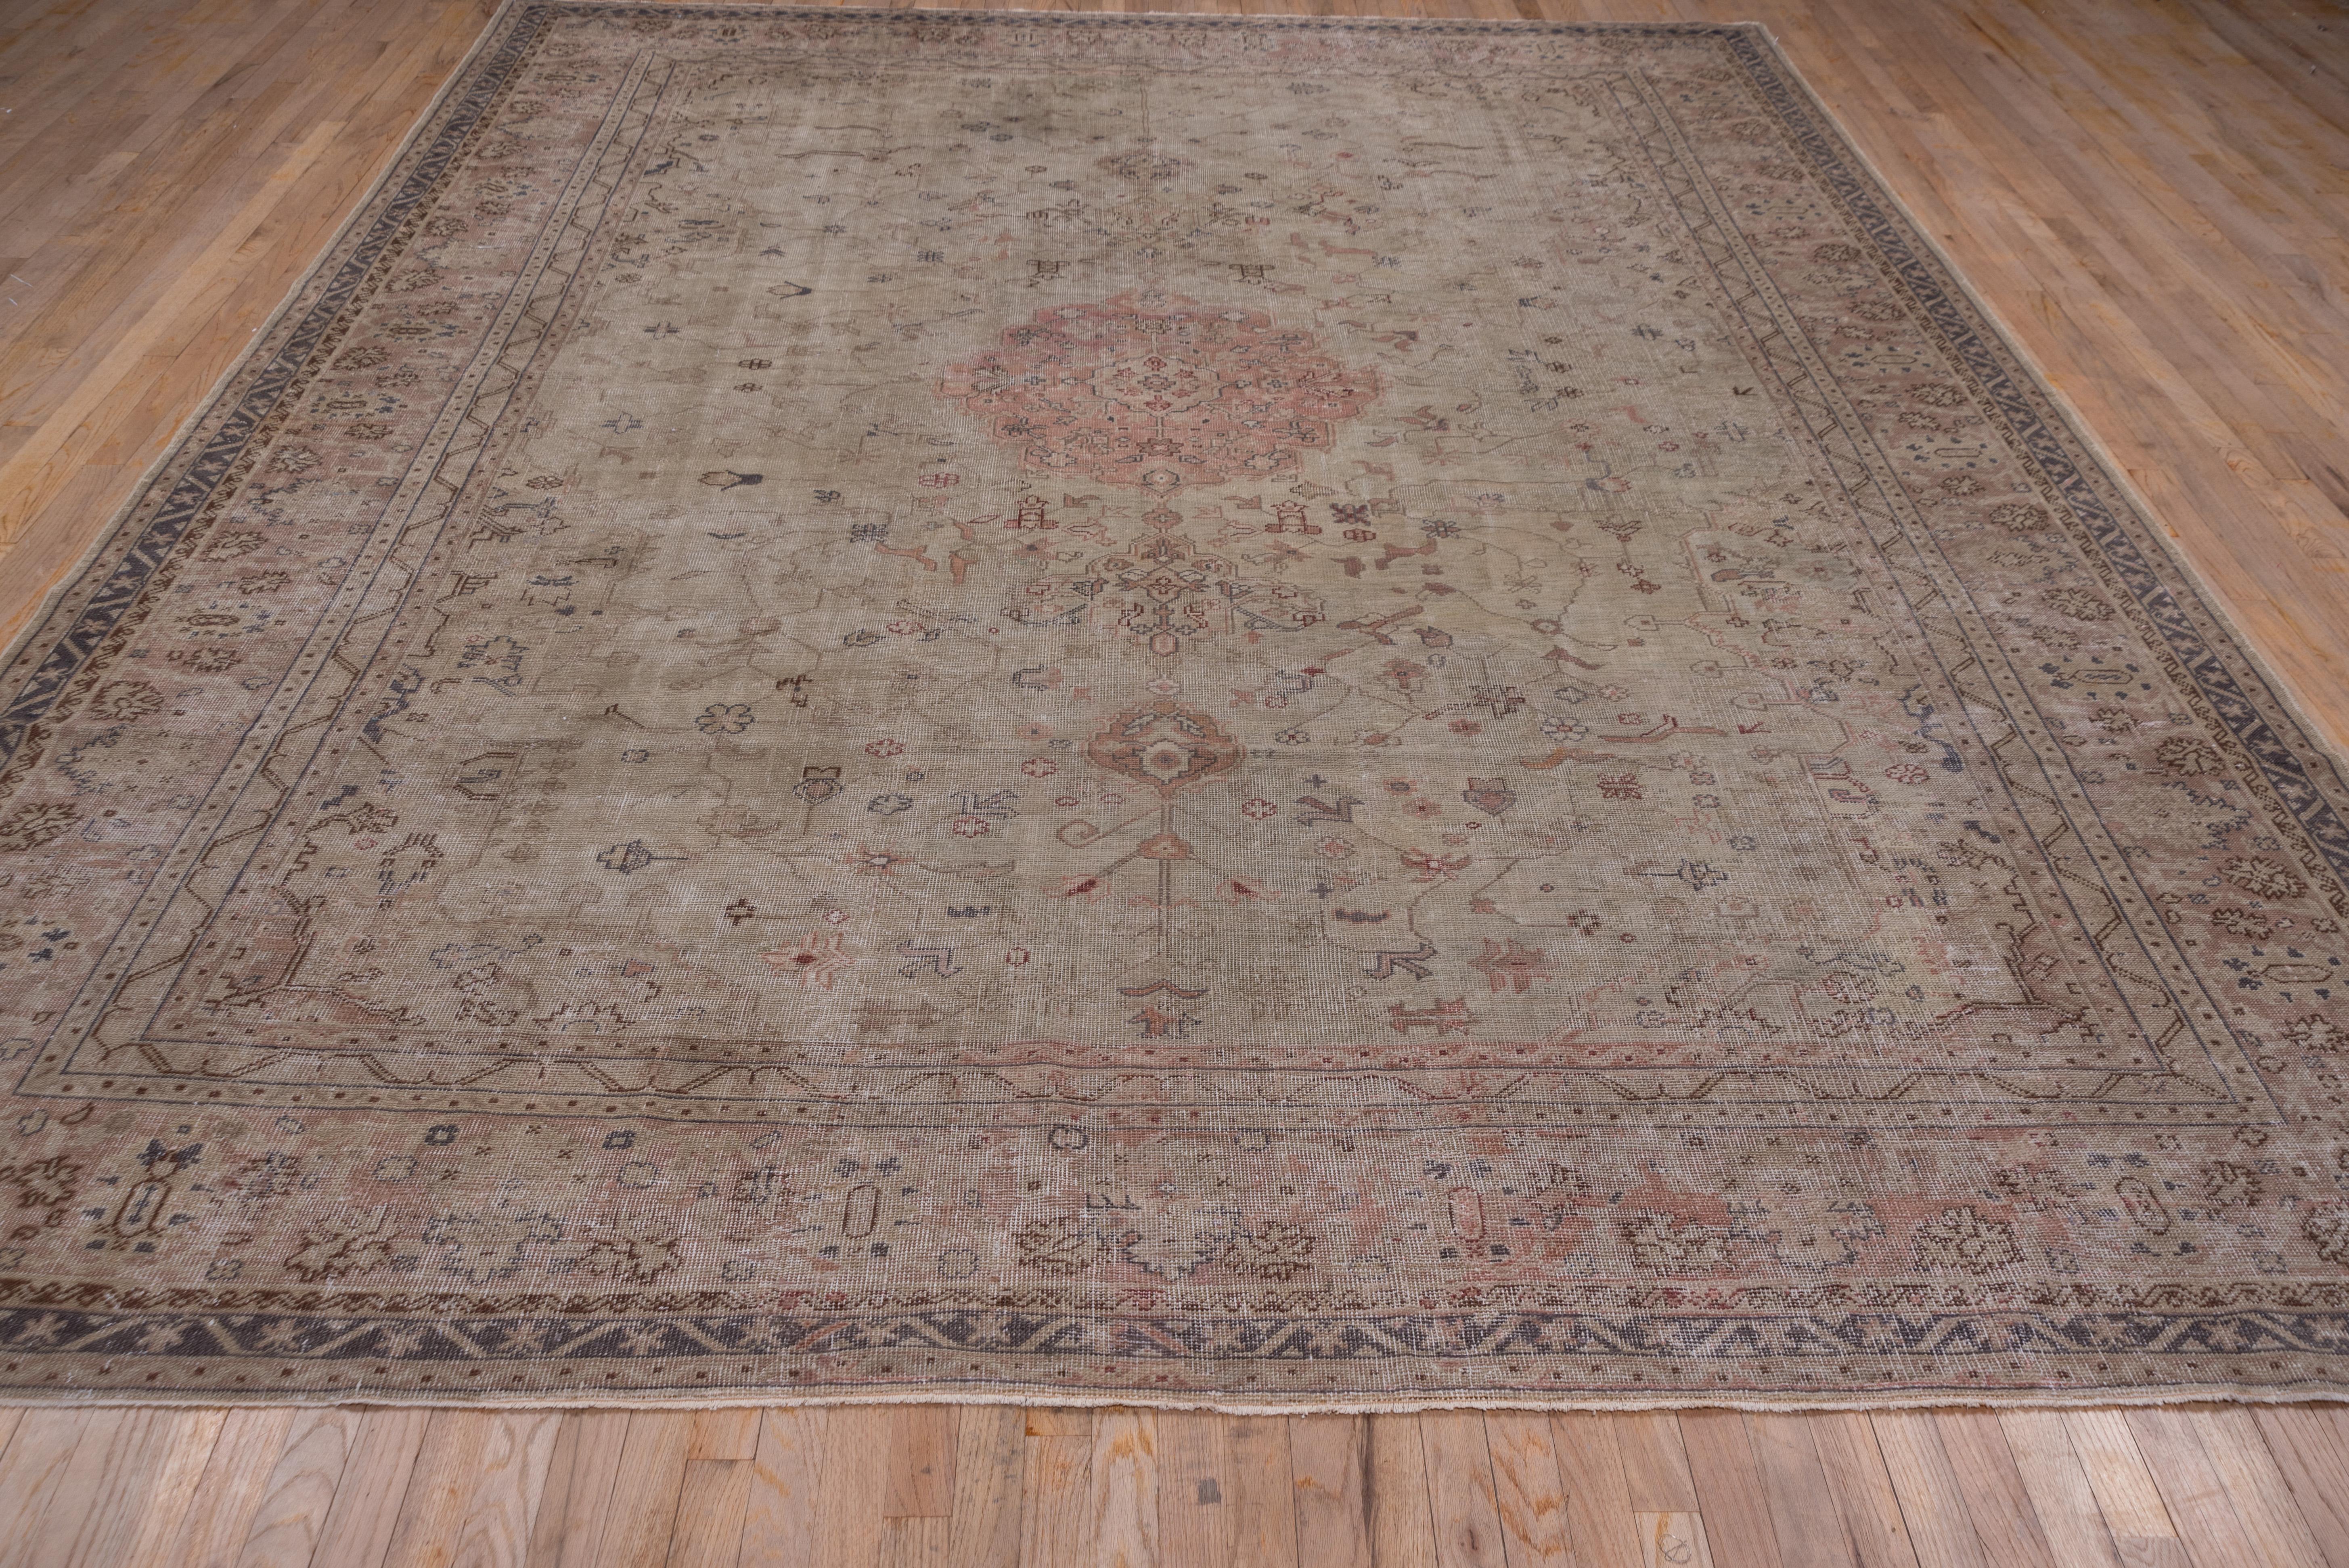 Antique Turkish Sivas Rug, Sage Green Field, Center Medallion, Pink Borders In Good Condition For Sale In New York, NY